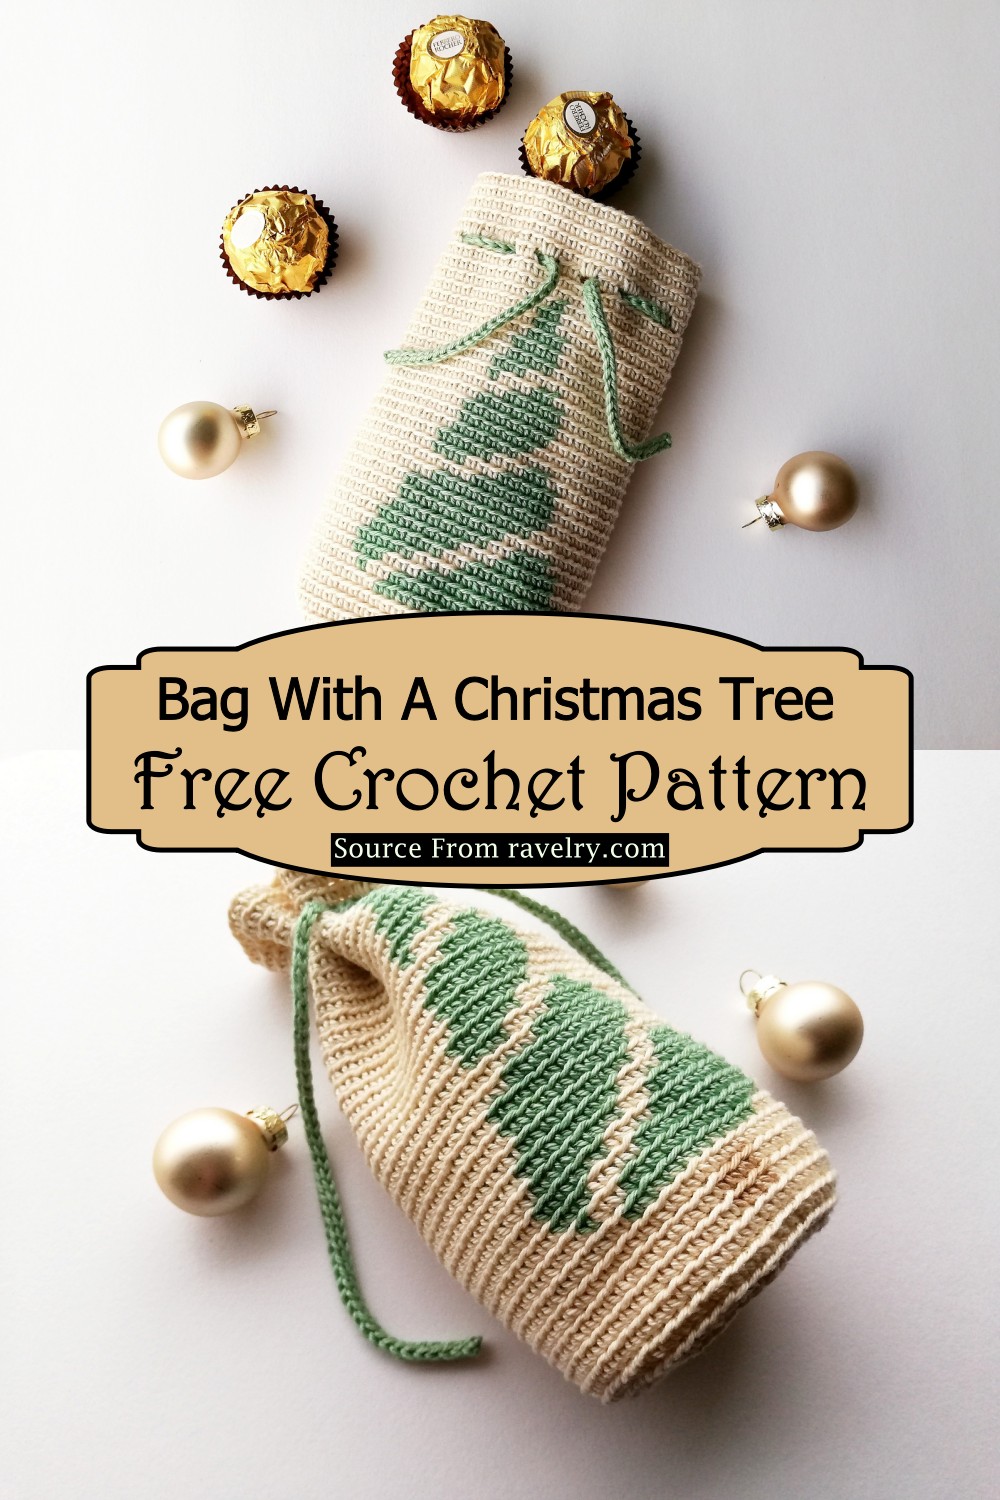 Crochet Bag With A Christmas Tree Pattern